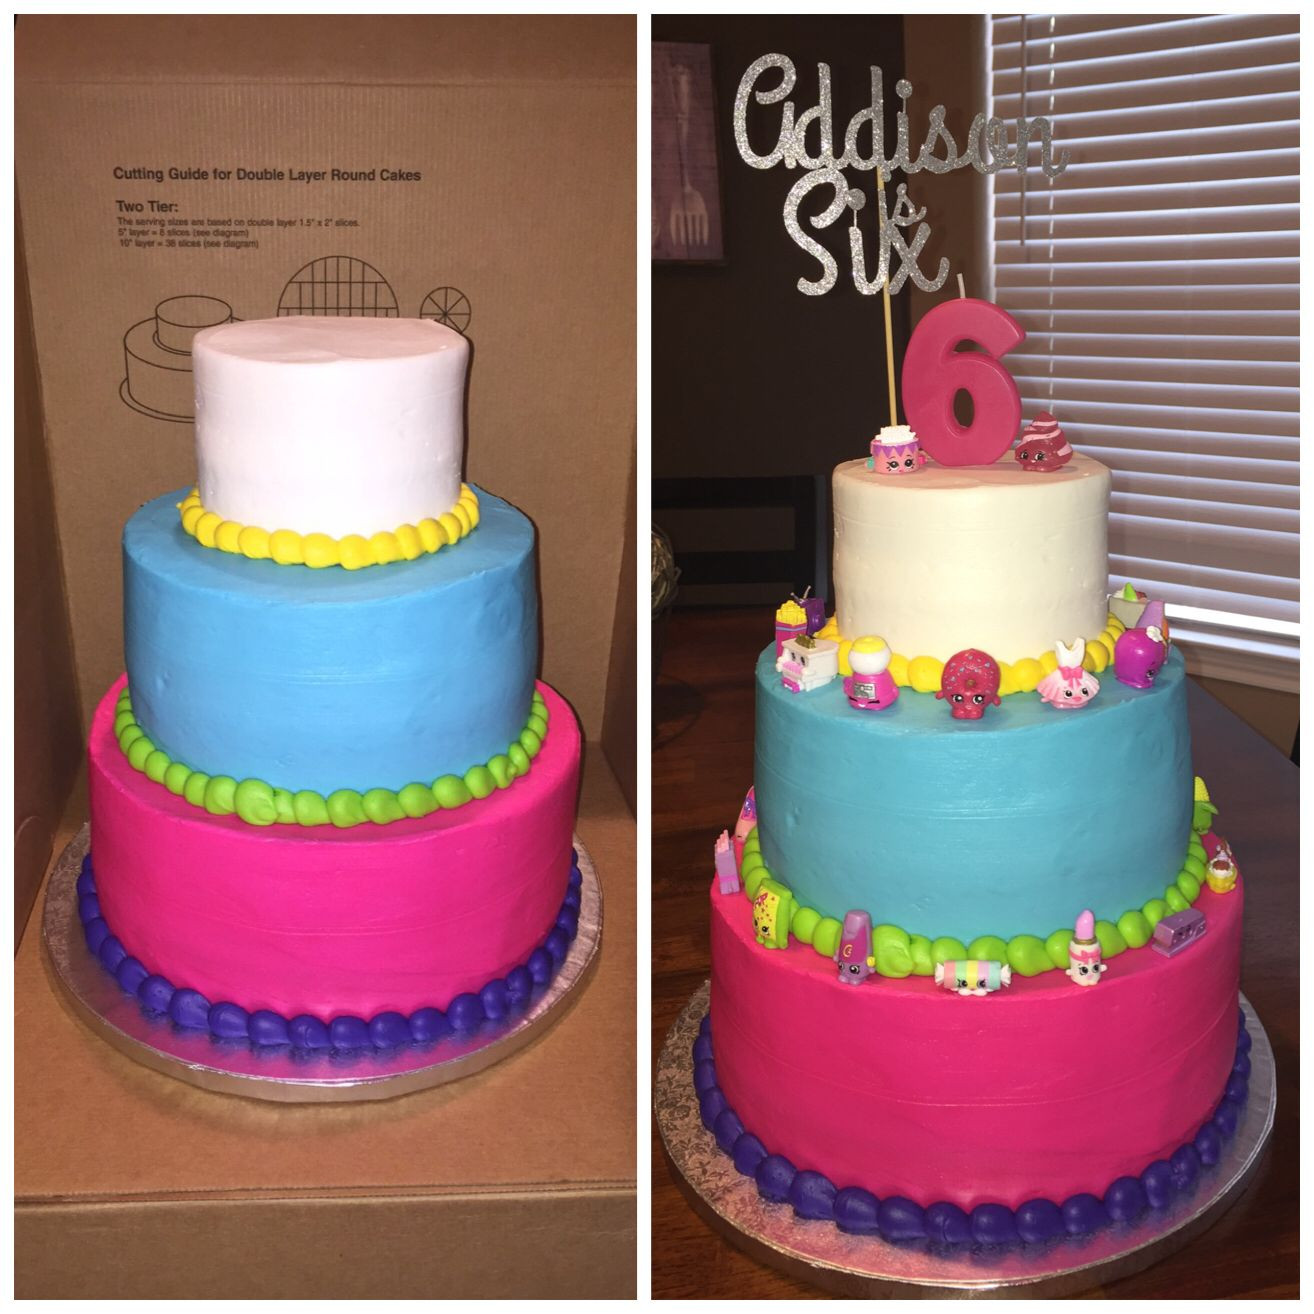 Sams Club Birthday Cake Designs
 Shopkins Cake Ordered 3 tiered cake from Sam s club and